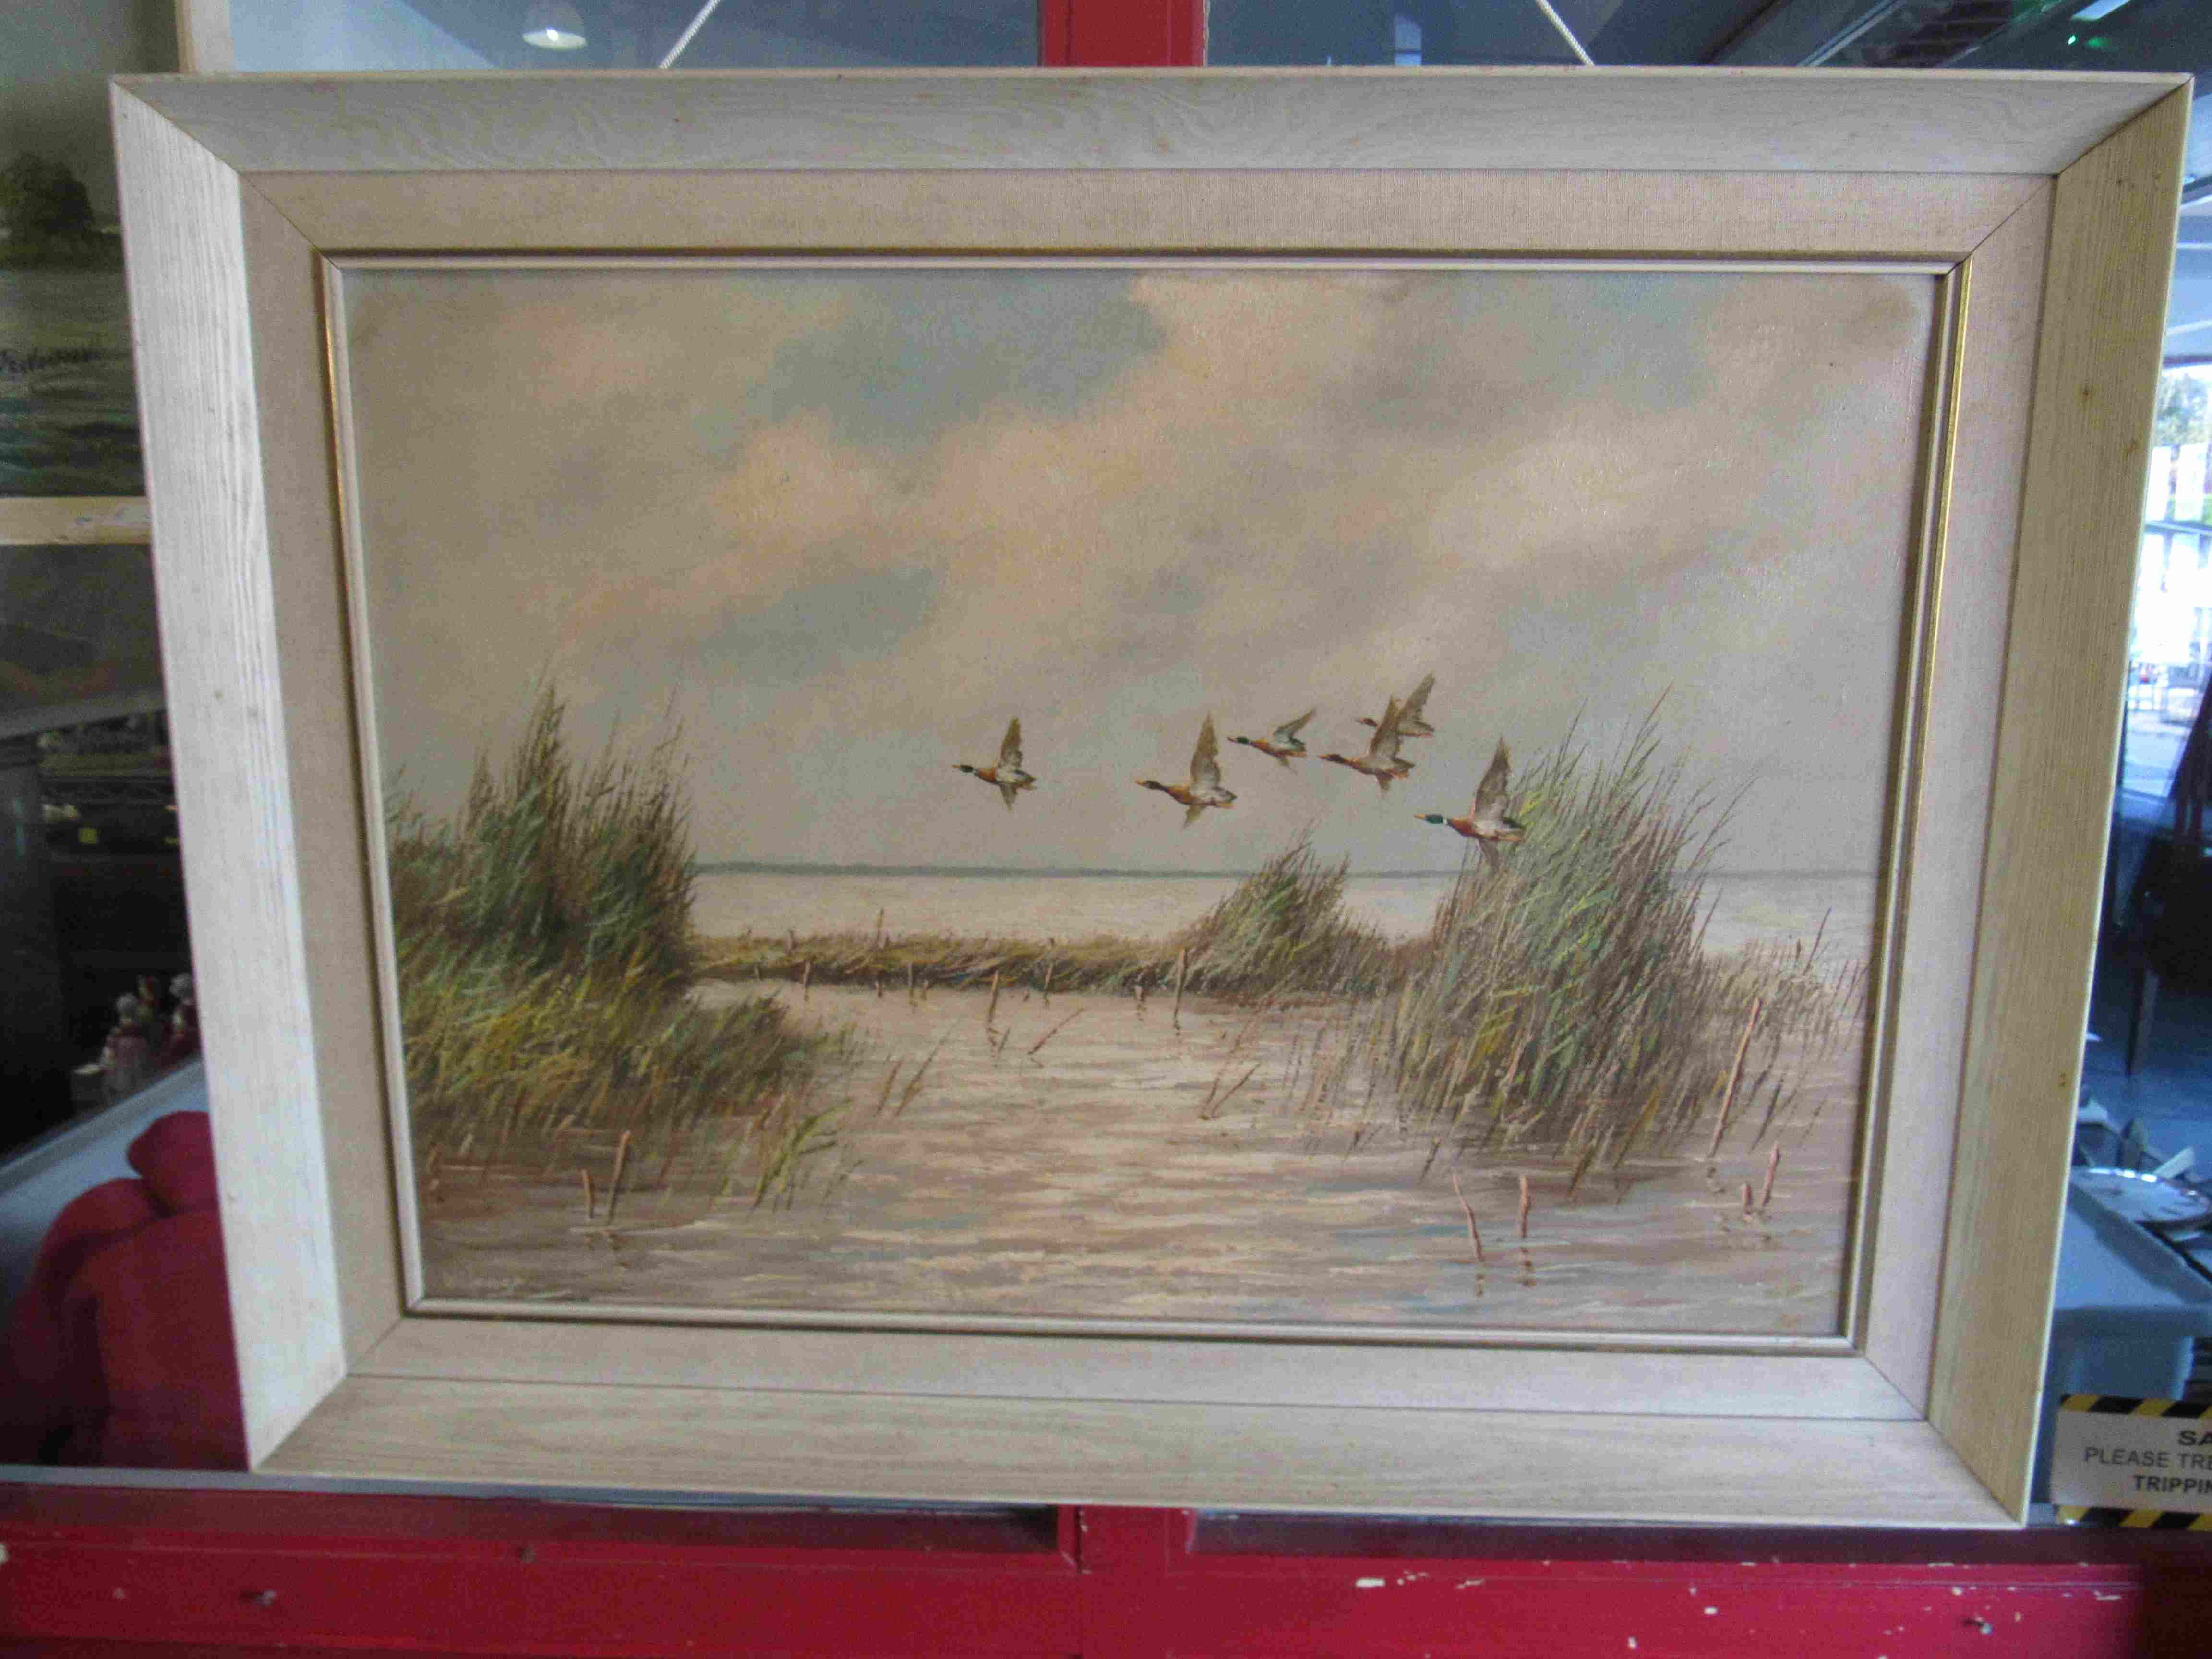 WILLEMGE: Ducks flying over coastal reed beds. Oils on canvas.